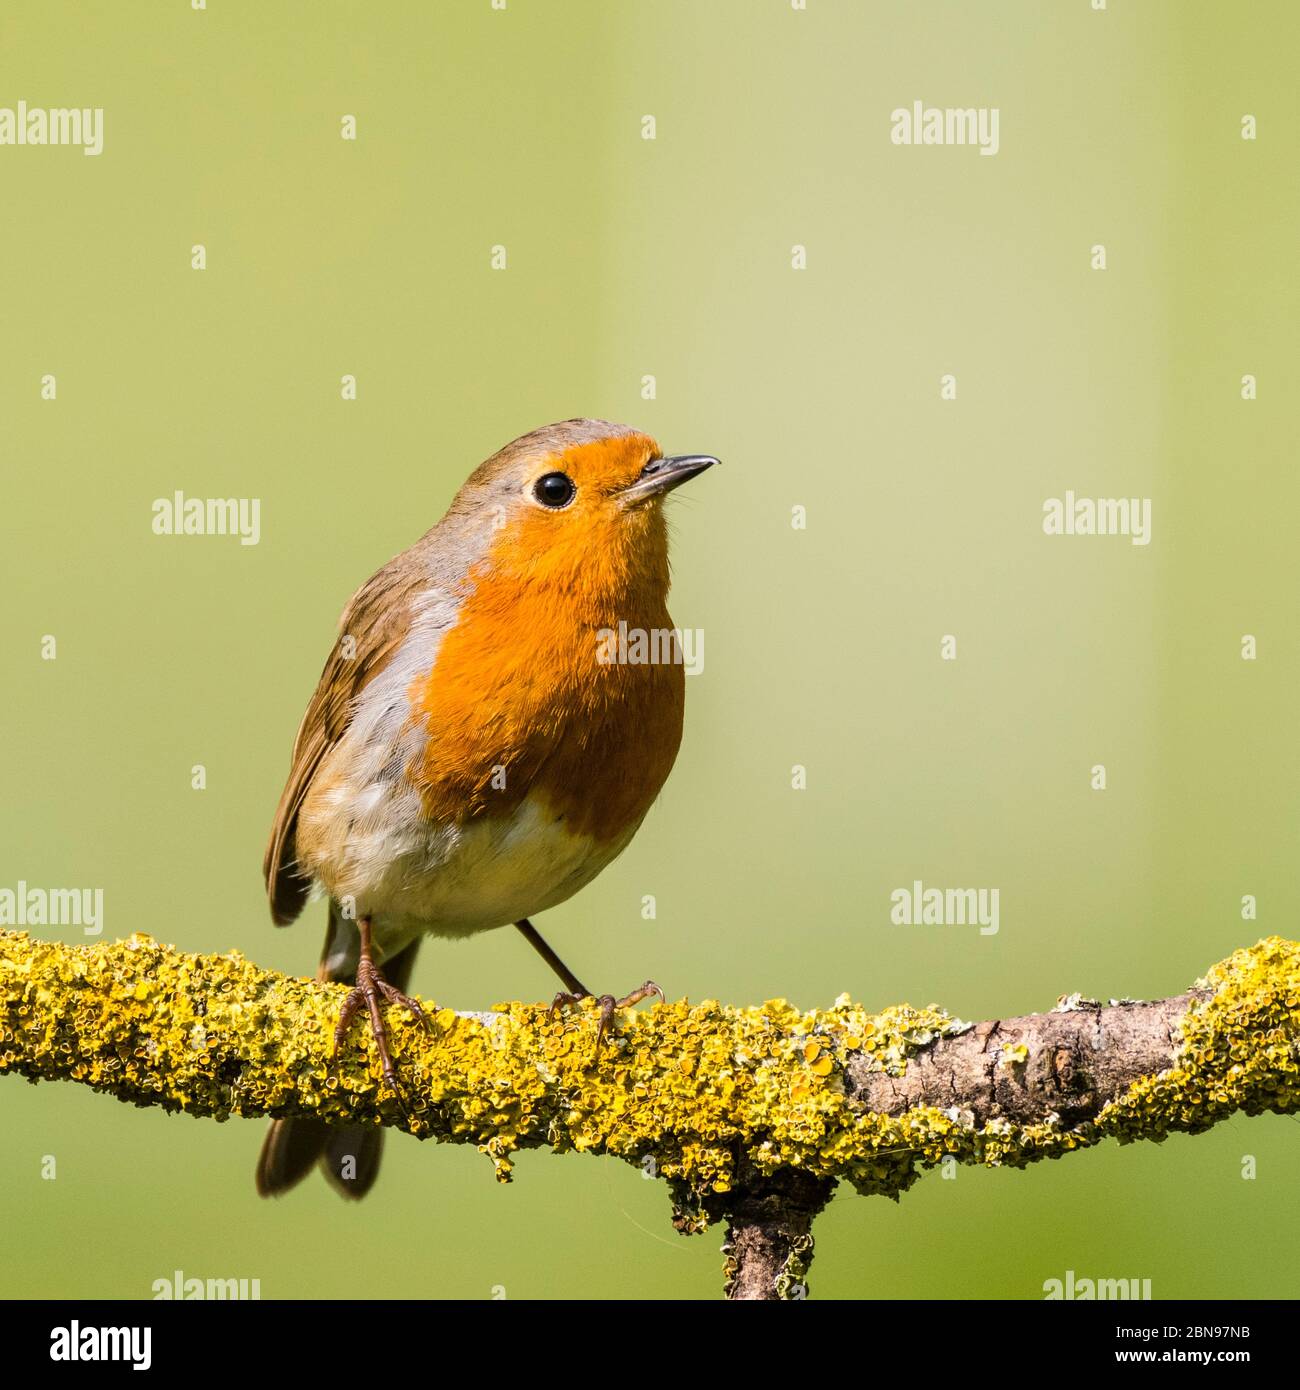 A Robin (Erithacus rubecula) in the Uk Stock Photo